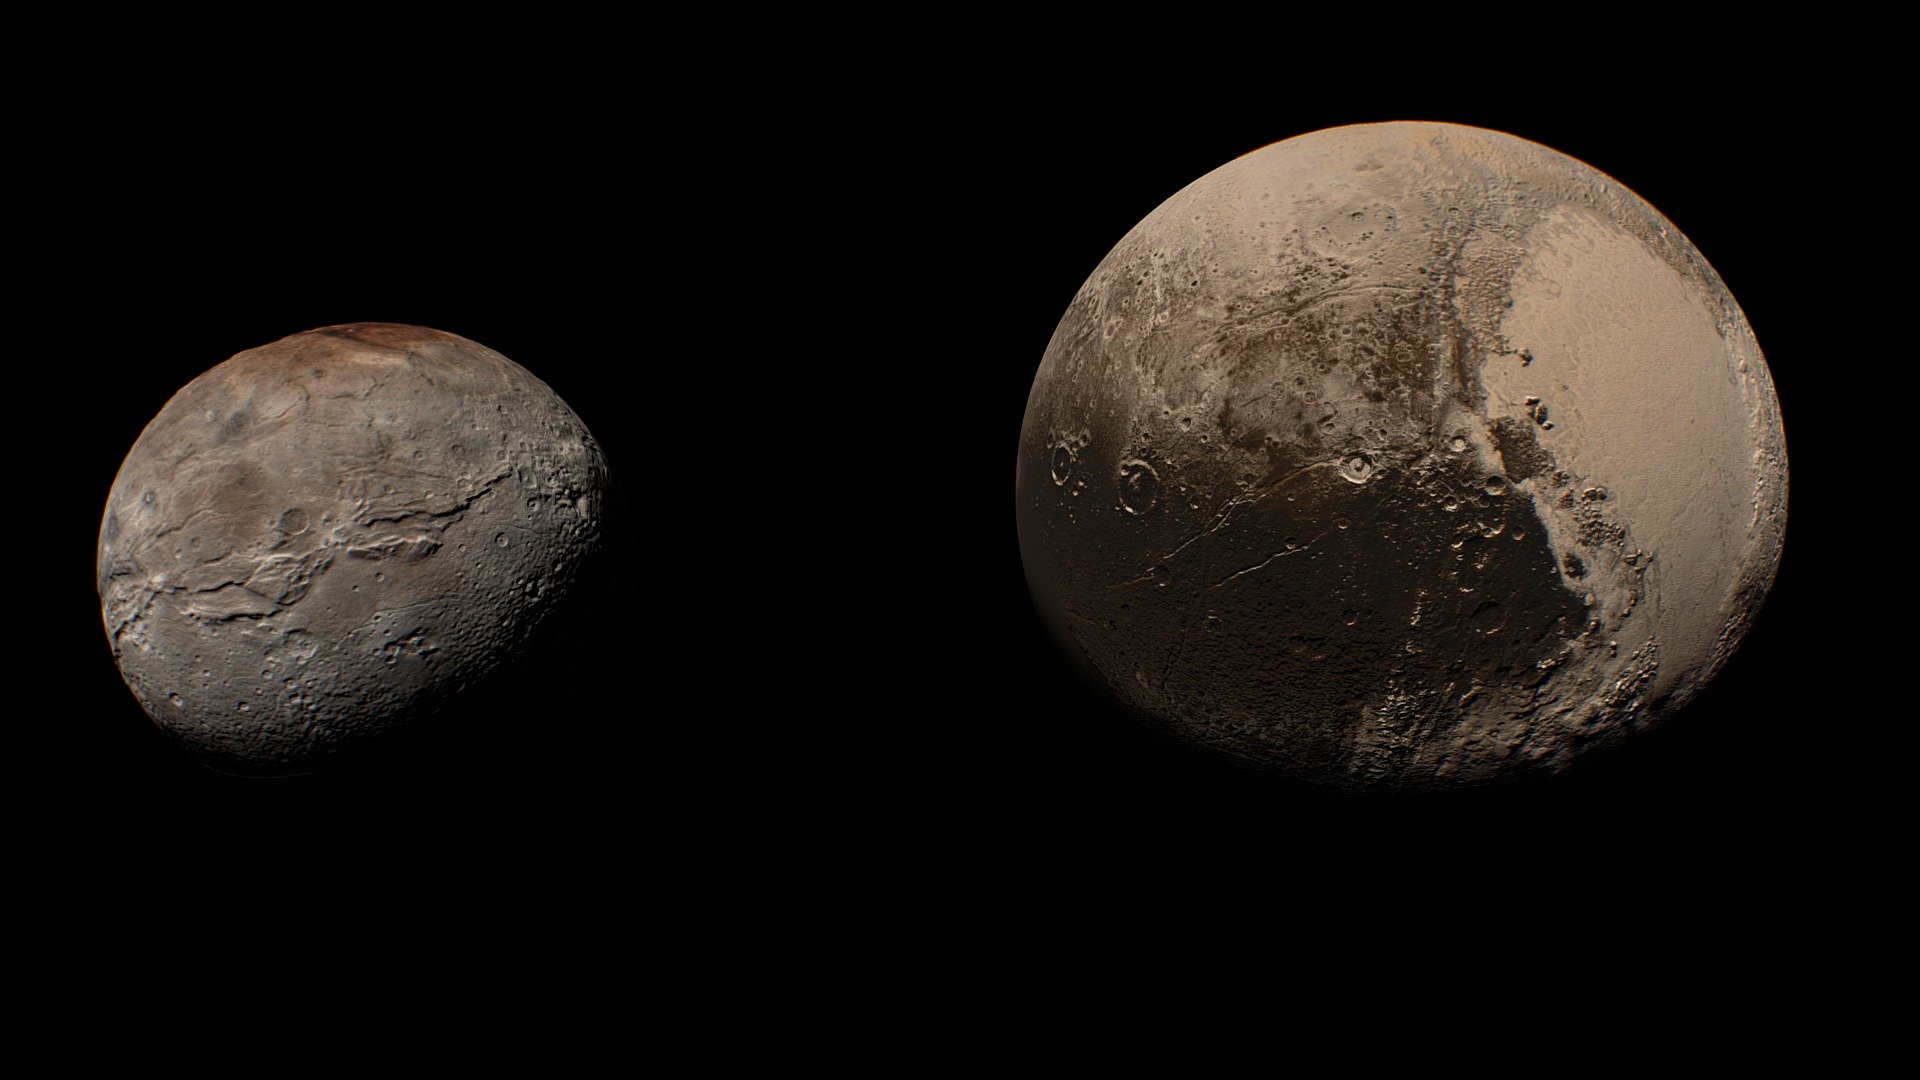 3d globes of the dwarf planet Pluto and its moon Charon.

These globes show the side of Pluto and Charon that were mapped in high resolution by the New Horizons probe and include realistically scaled 3d height details. The relative scale between the two bodies is shown accurately though the distance between them is not 3d model